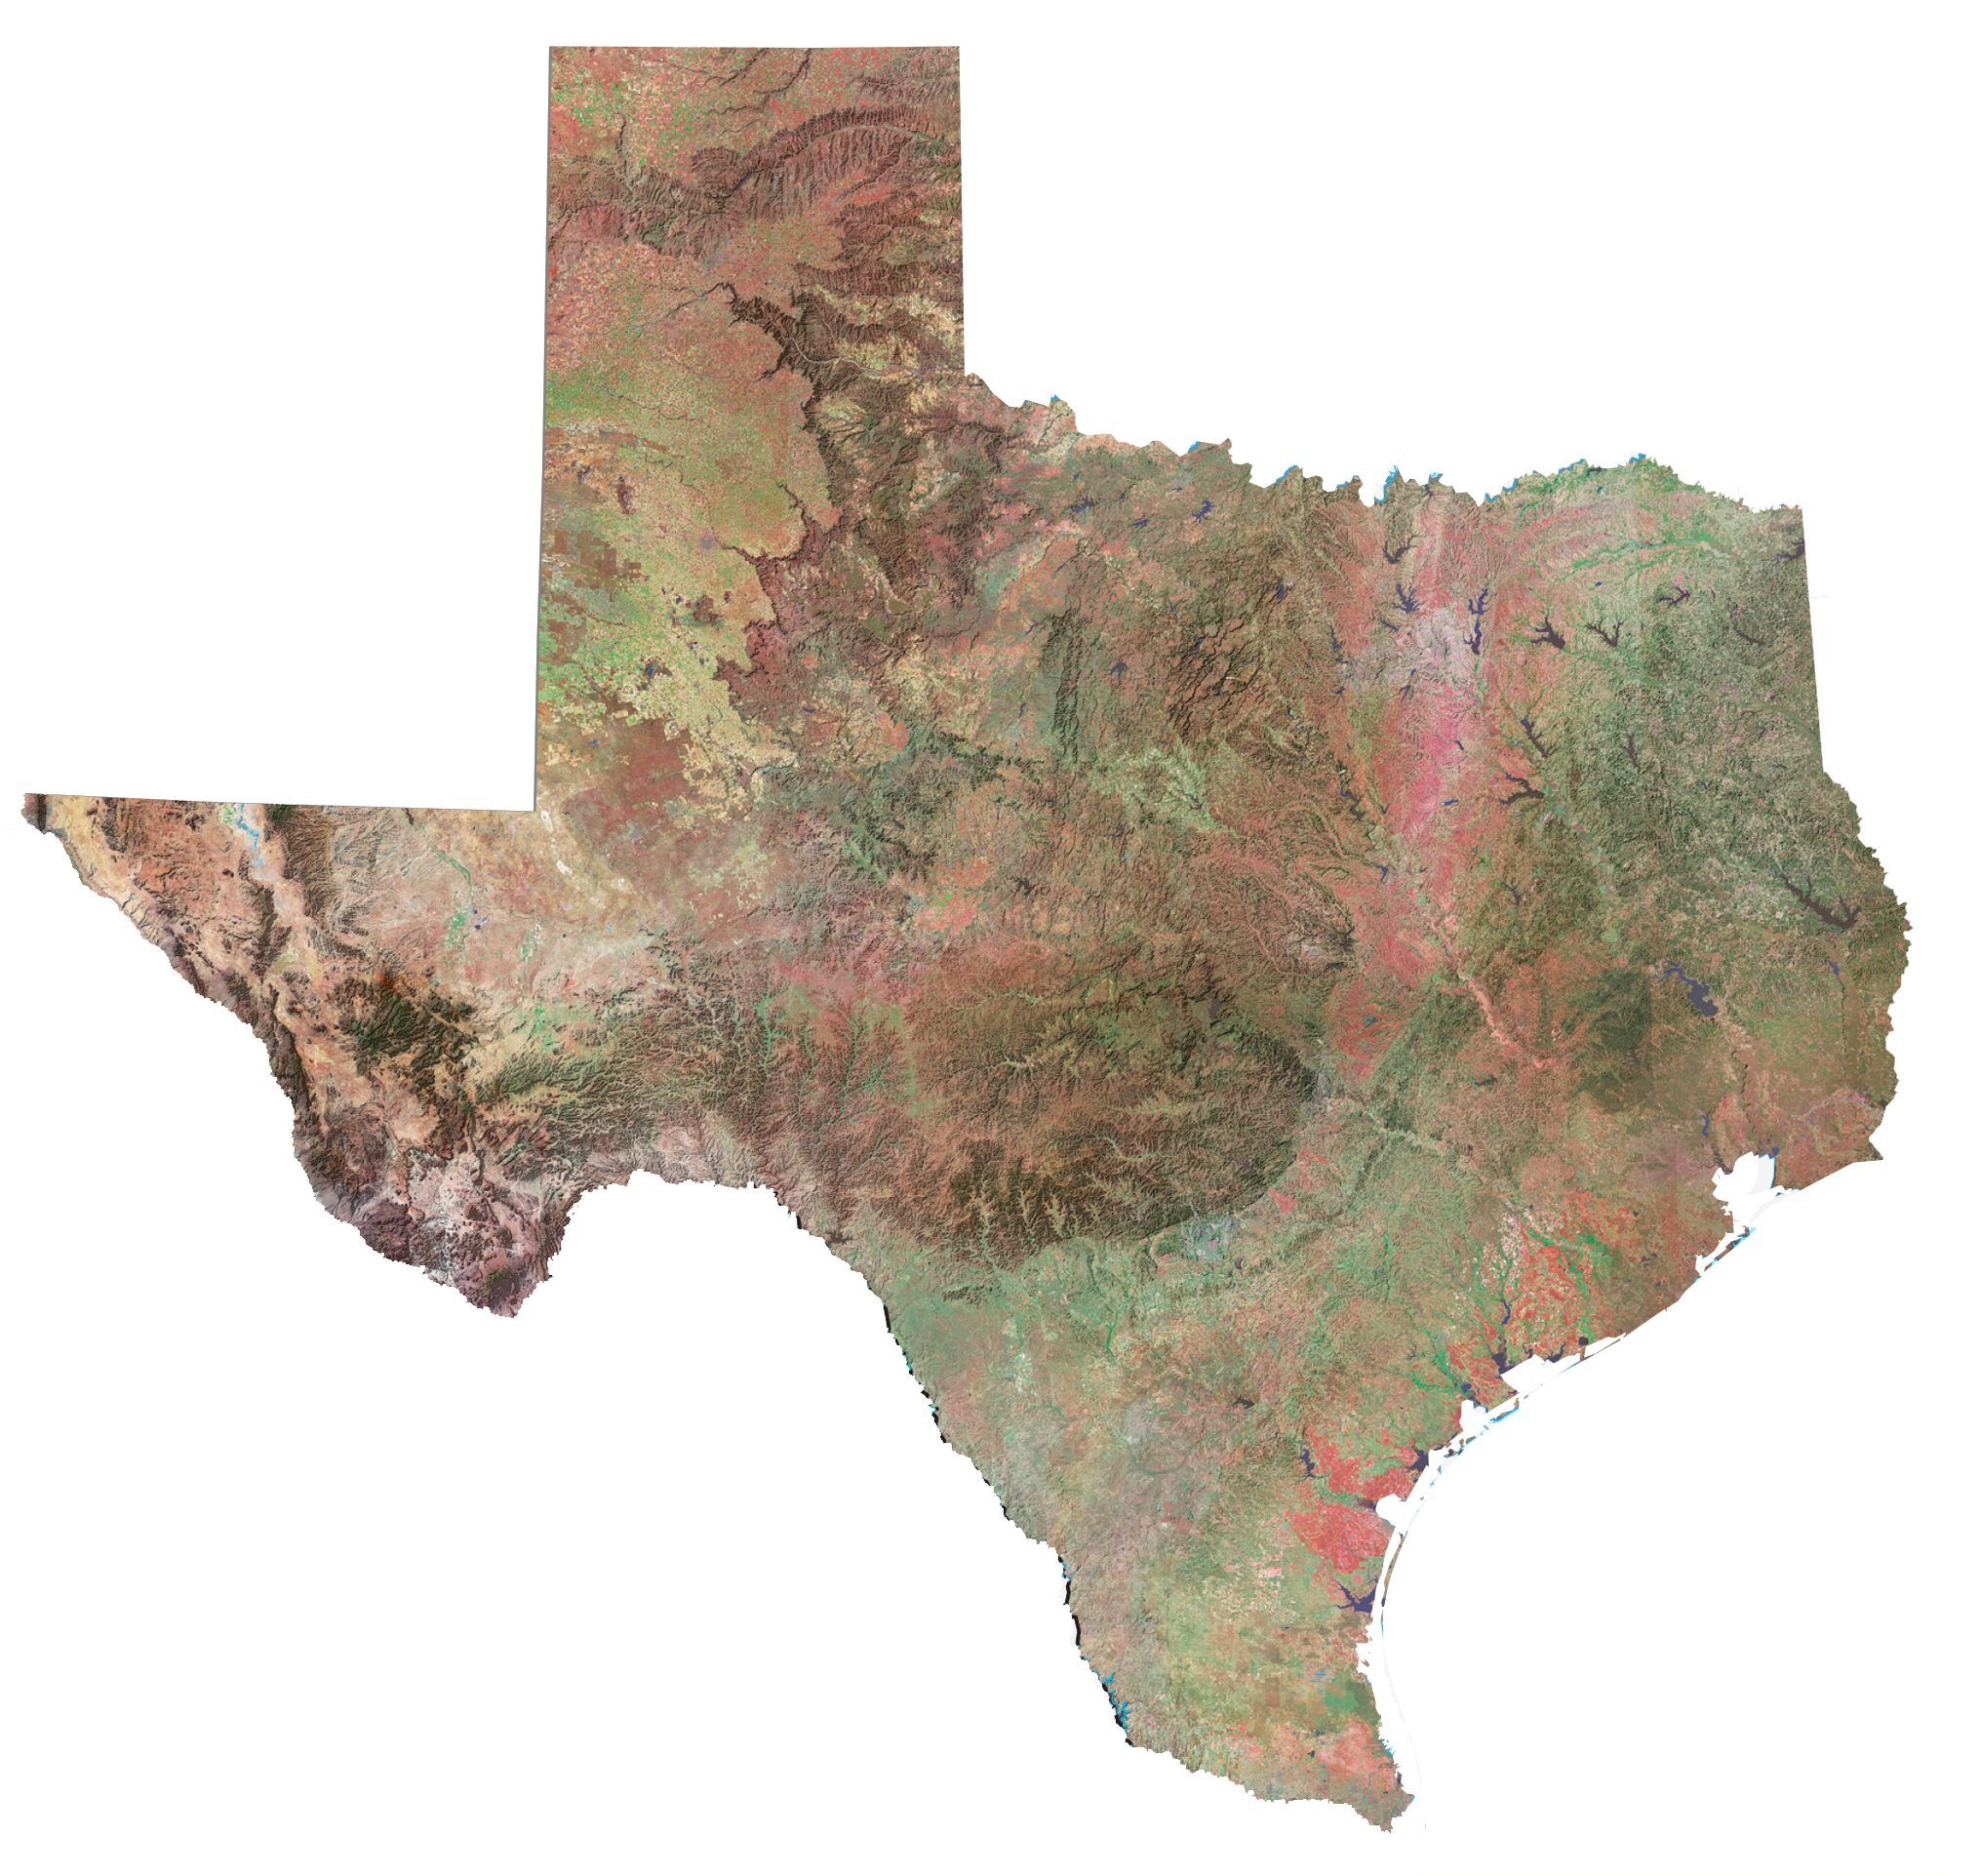 Map of Houston, Texas - GIS Geography